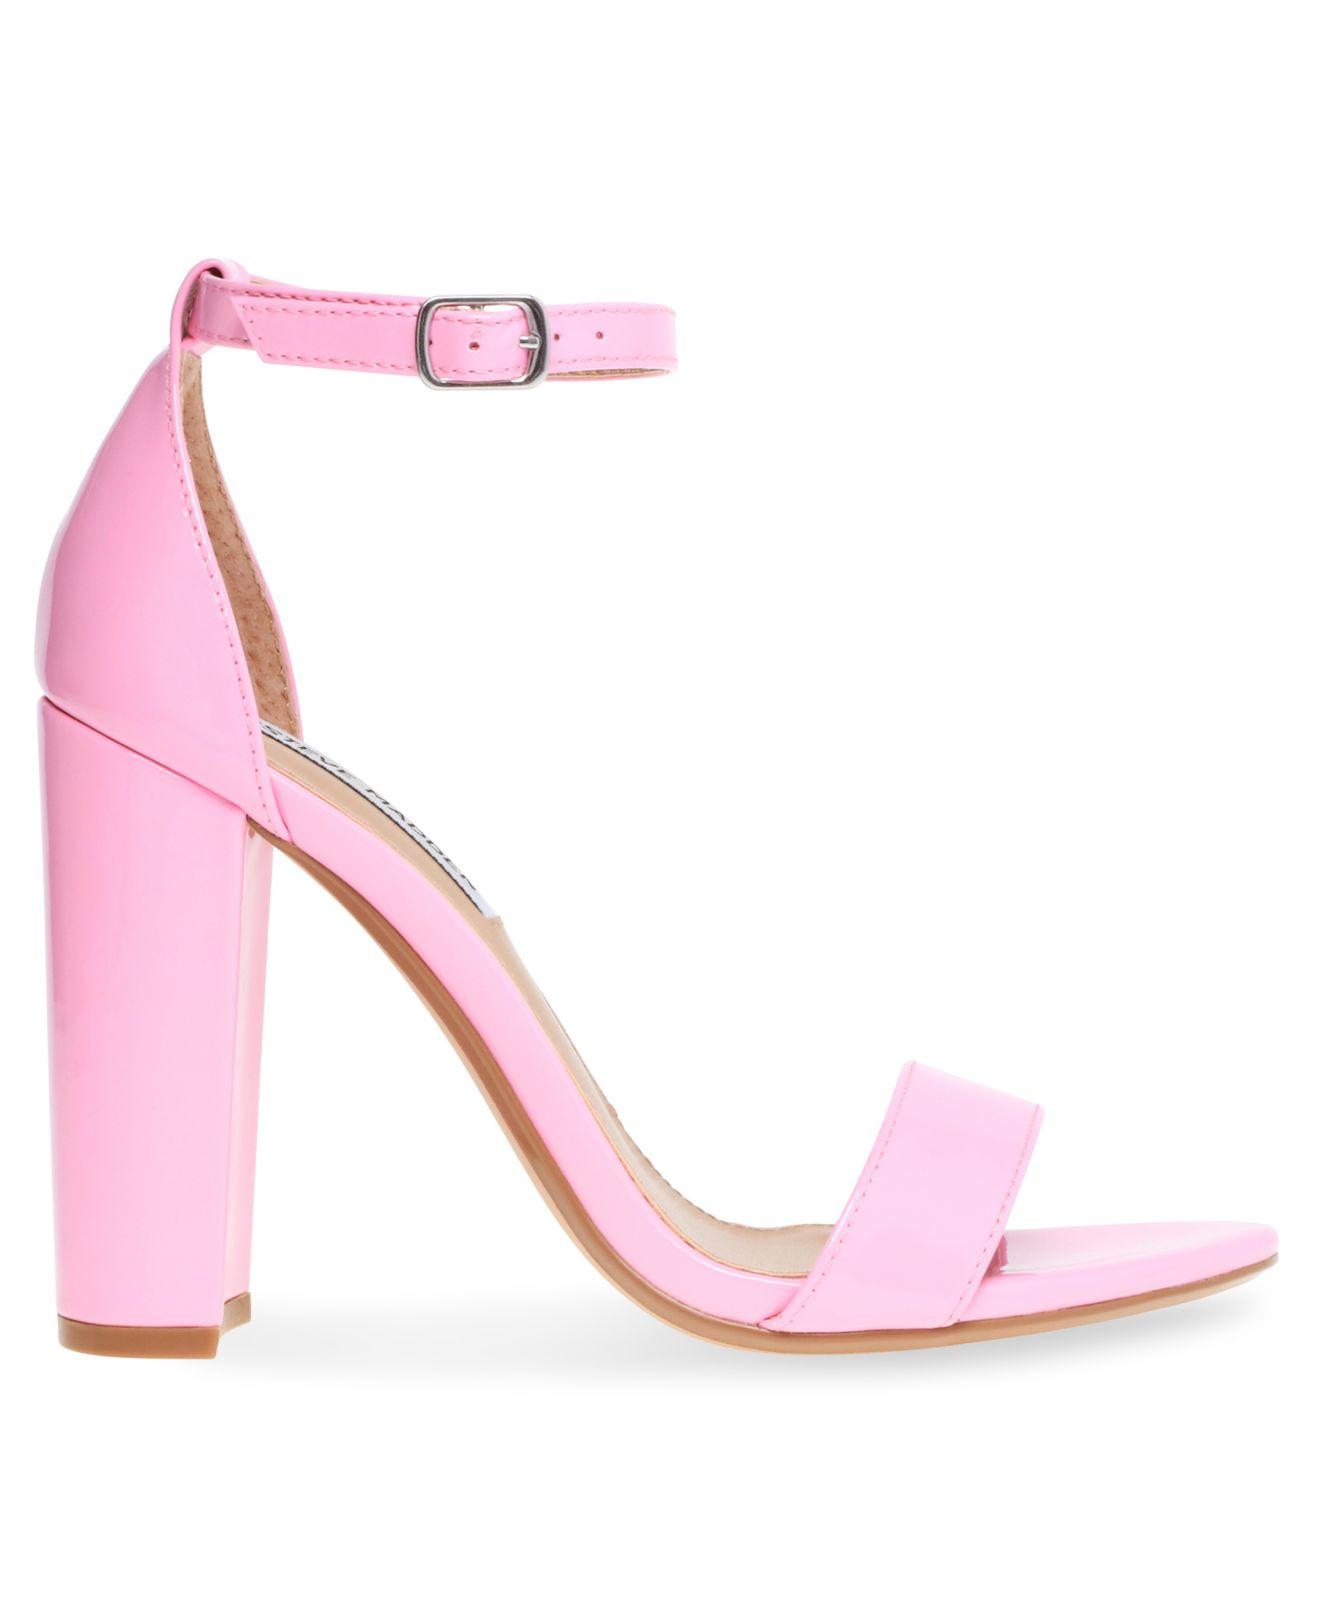 Steve Madden Carrson Two-piece Sandals in Pink | Lyst